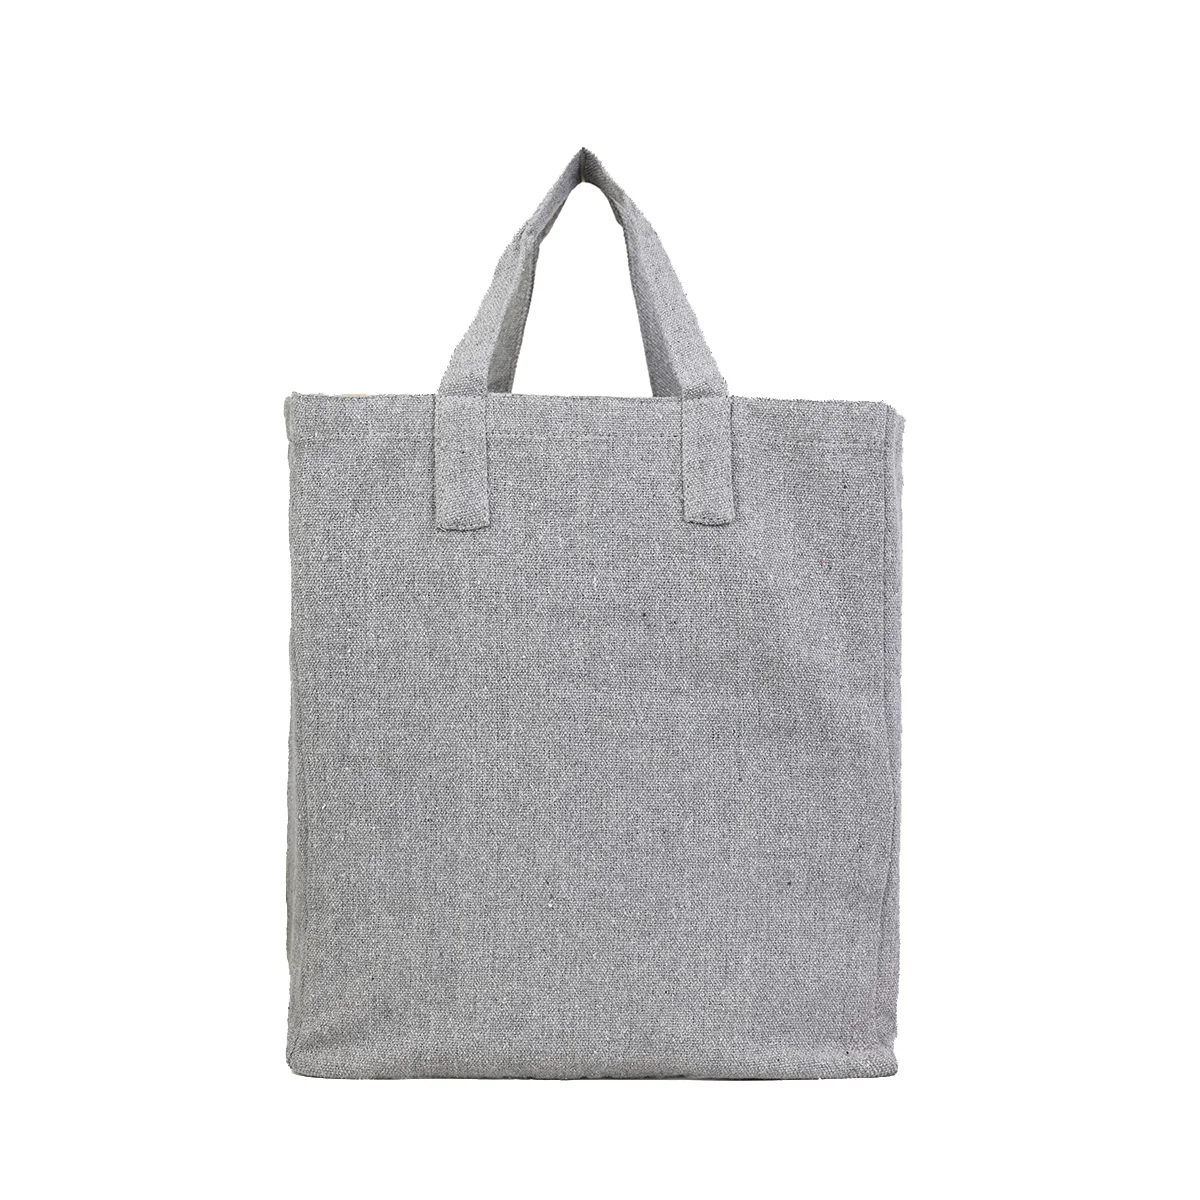 Sustainable Recycled Grocery bag with gusset made from 100% Recycled Cotton tote bag